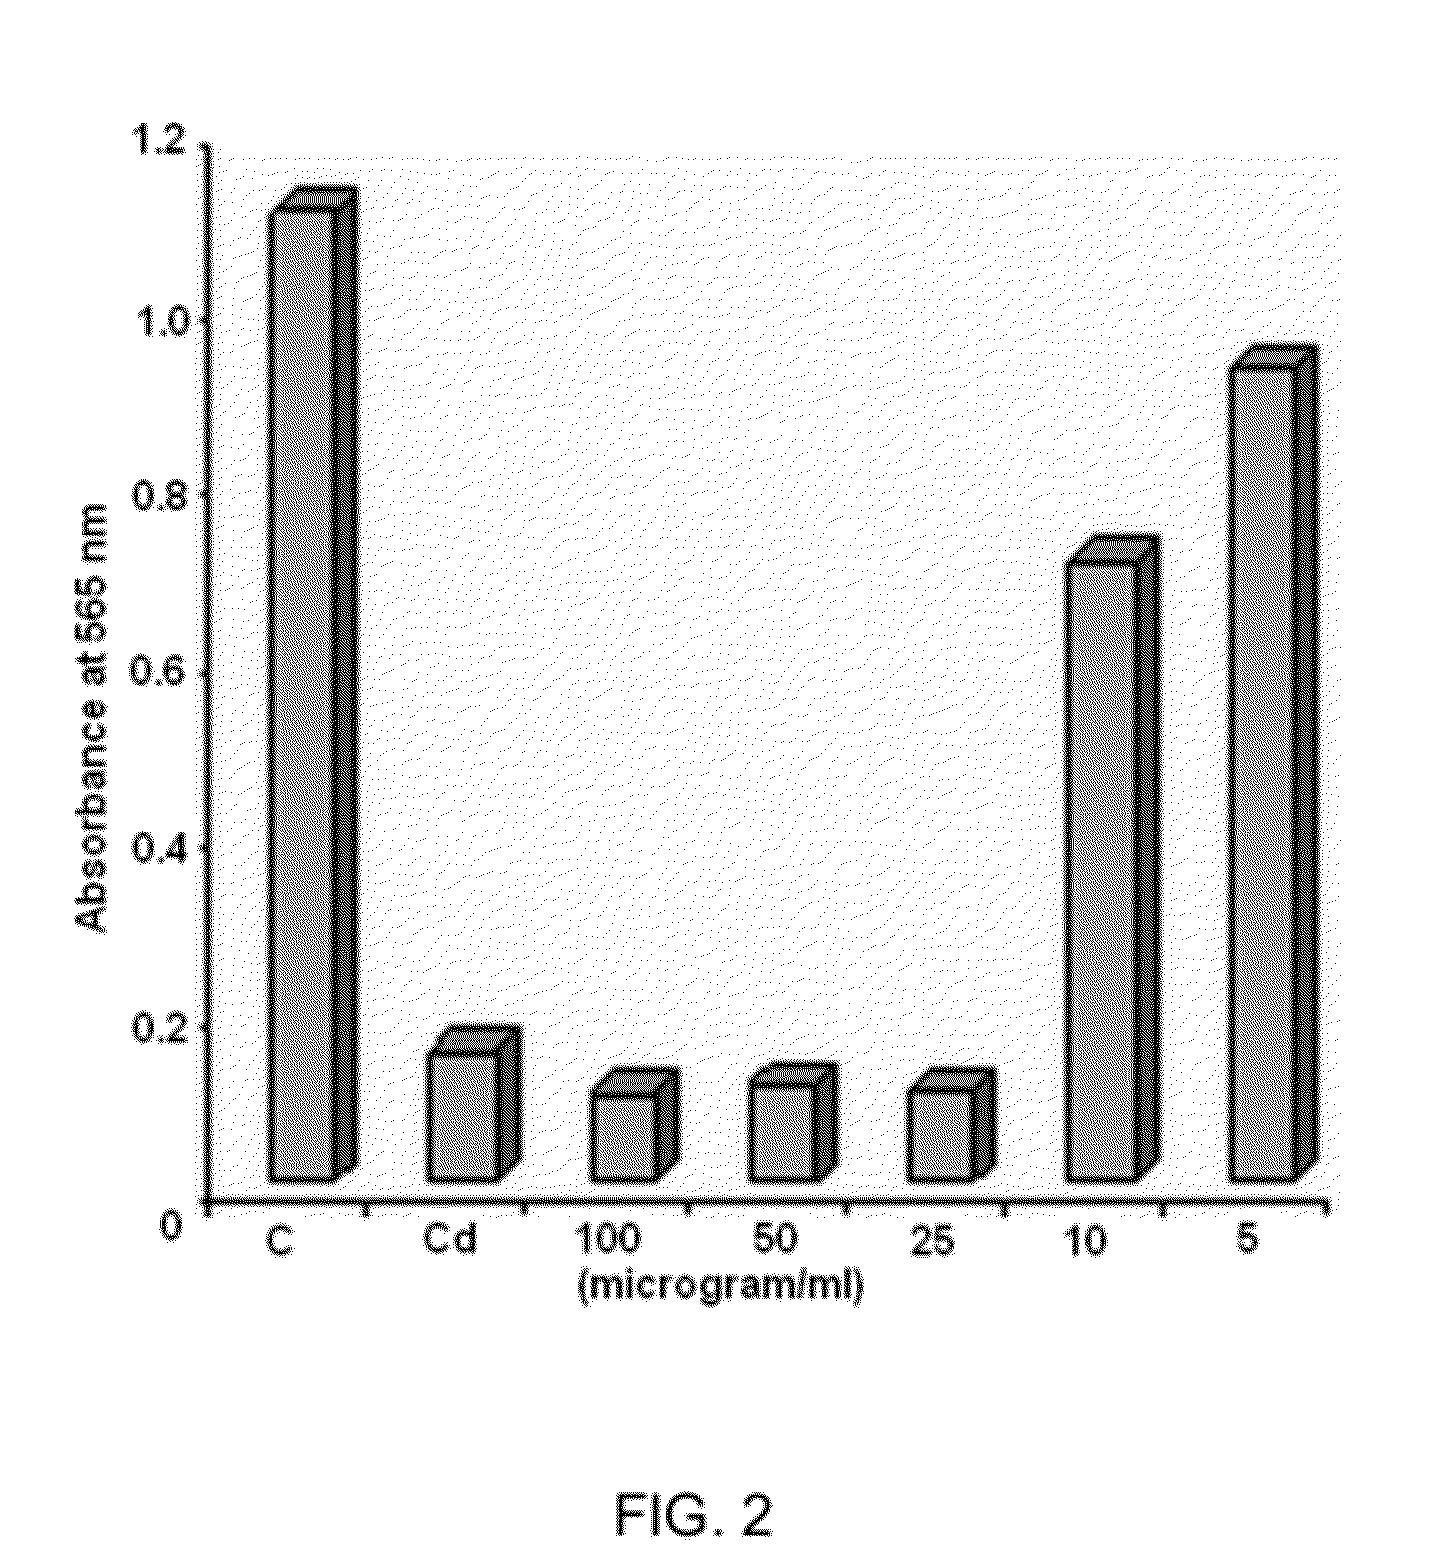 Method of extraction from withania somnifera and one or more fractions containing pharmacologically active ingredients obtained therefrom